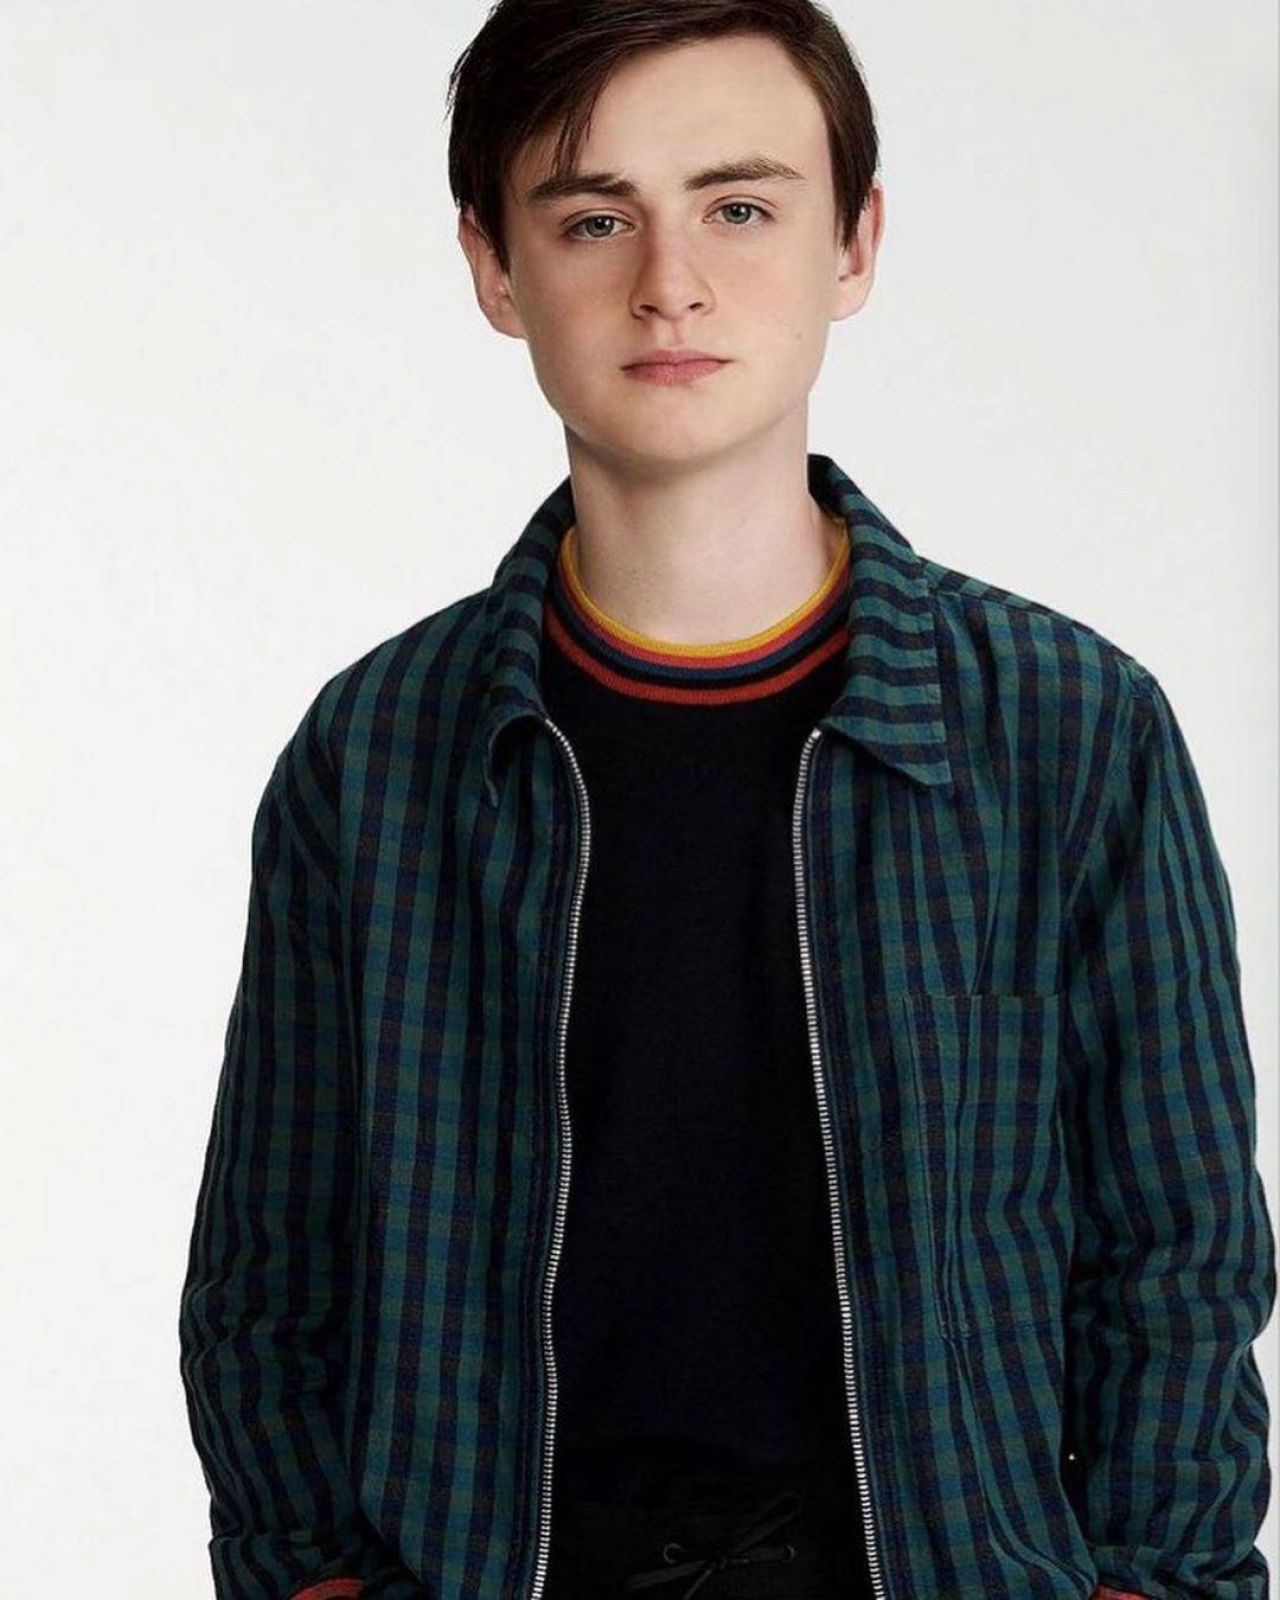 Plaid Zip-Up Jacket worn by Jaeden Lieberher for It Chapter Two promotional...